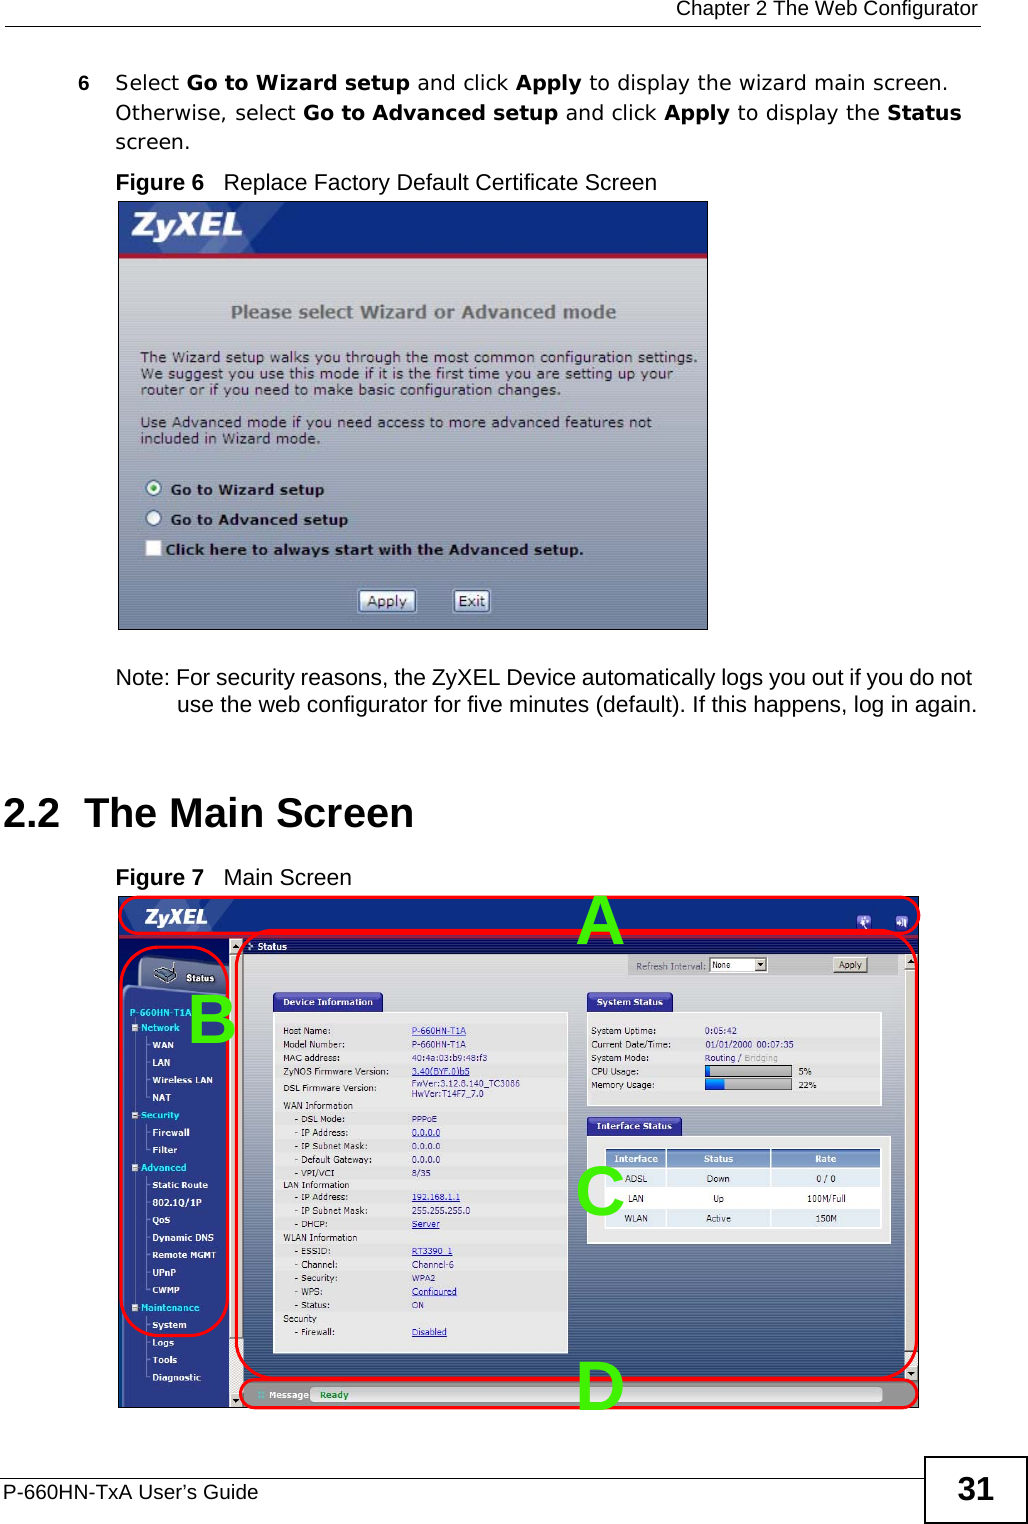  Chapter 2 The Web ConfiguratorP-660HN-TxA User’s Guide 316Select Go to Wizard setup and click Apply to display the wizard main screen. Otherwise, select Go to Advanced setup and click Apply to display the Status screen.Figure 6   Replace Factory Default Certificate Screen Note: For security reasons, the ZyXEL Device automatically logs you out if you do not use the web configurator for five minutes (default). If this happens, log in again.2.2  The Main ScreenFigure 7   Main ScreenBCDA